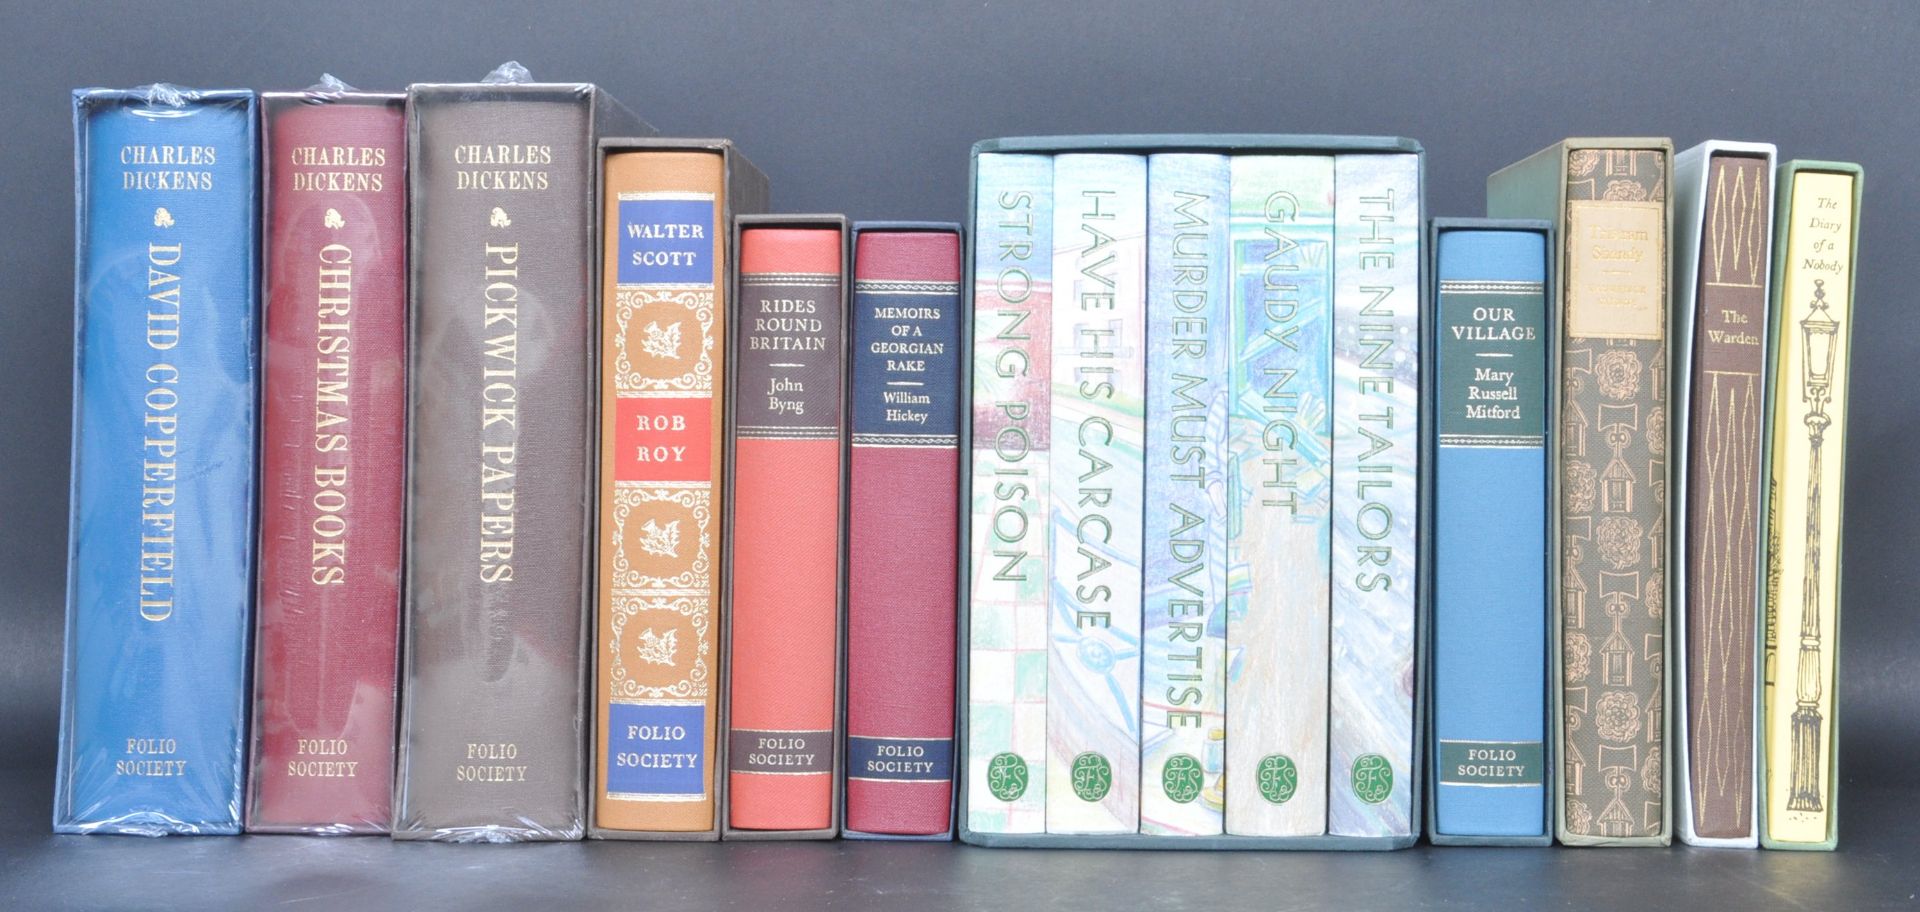 FOLIO SOCIETY - LARGE COLLECTION OF HARDCOVER FICTION BOOKS